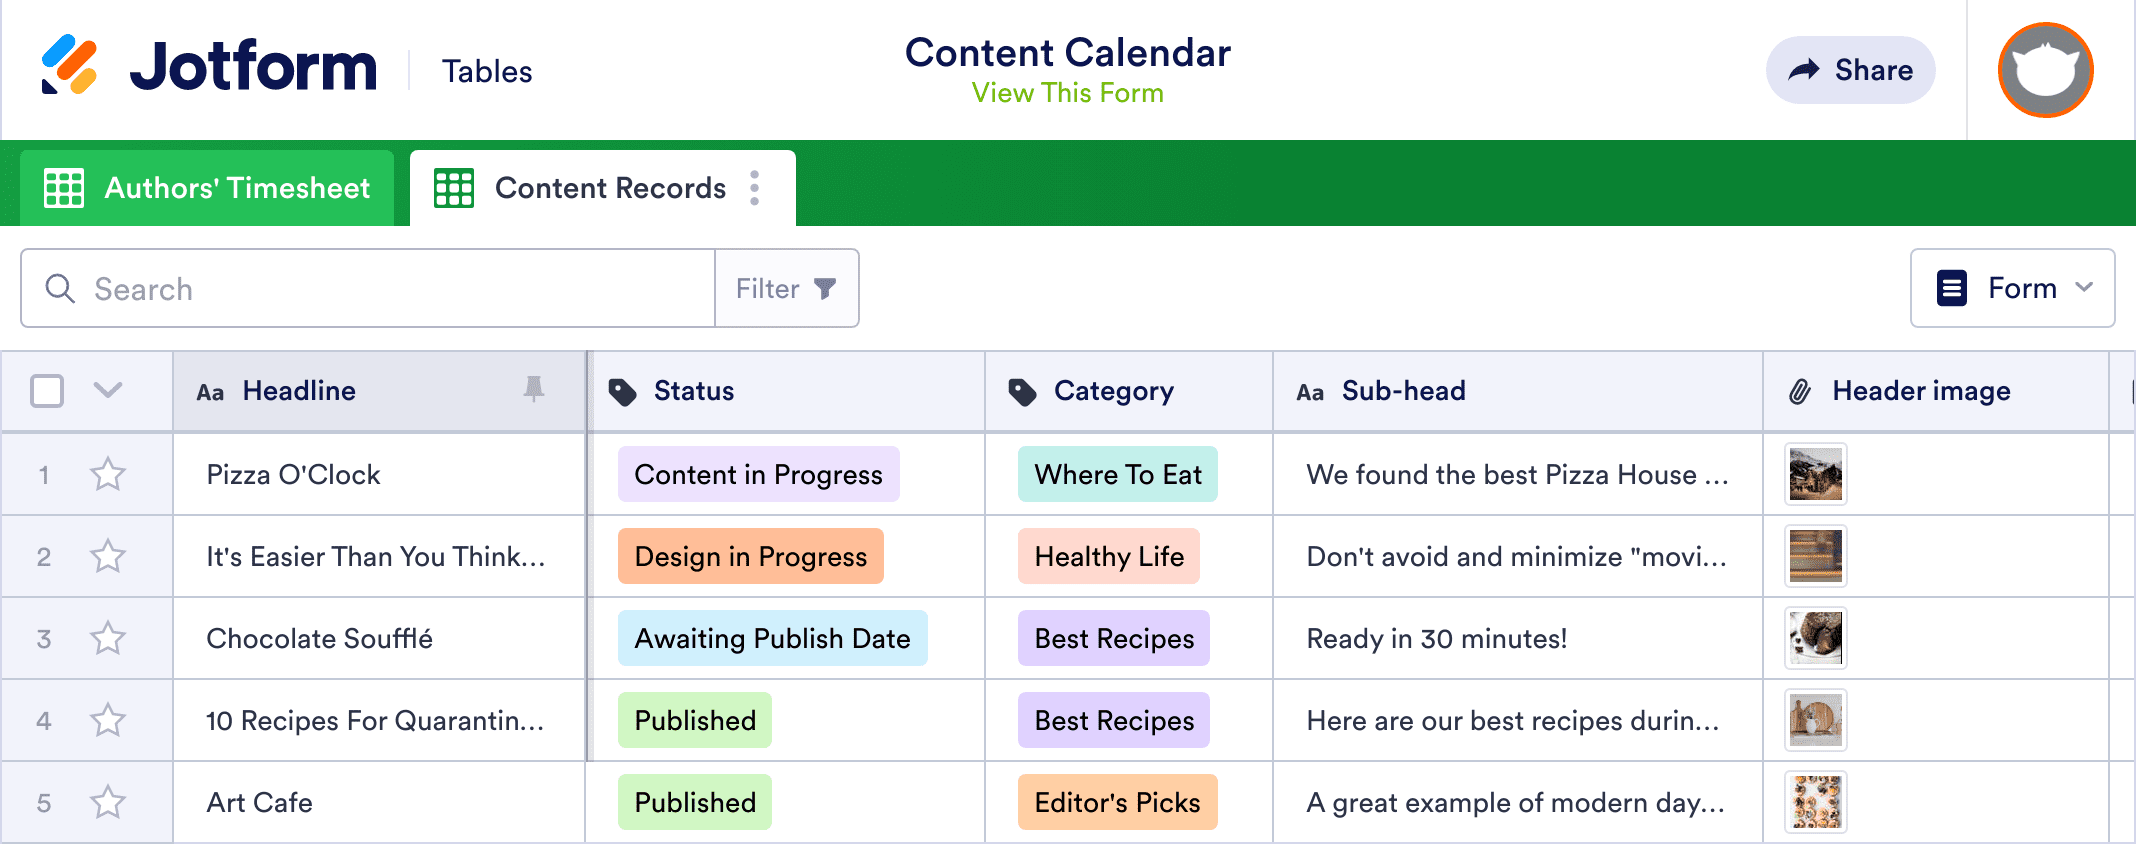 Free Content Calendar Template from Boot Camp Digital